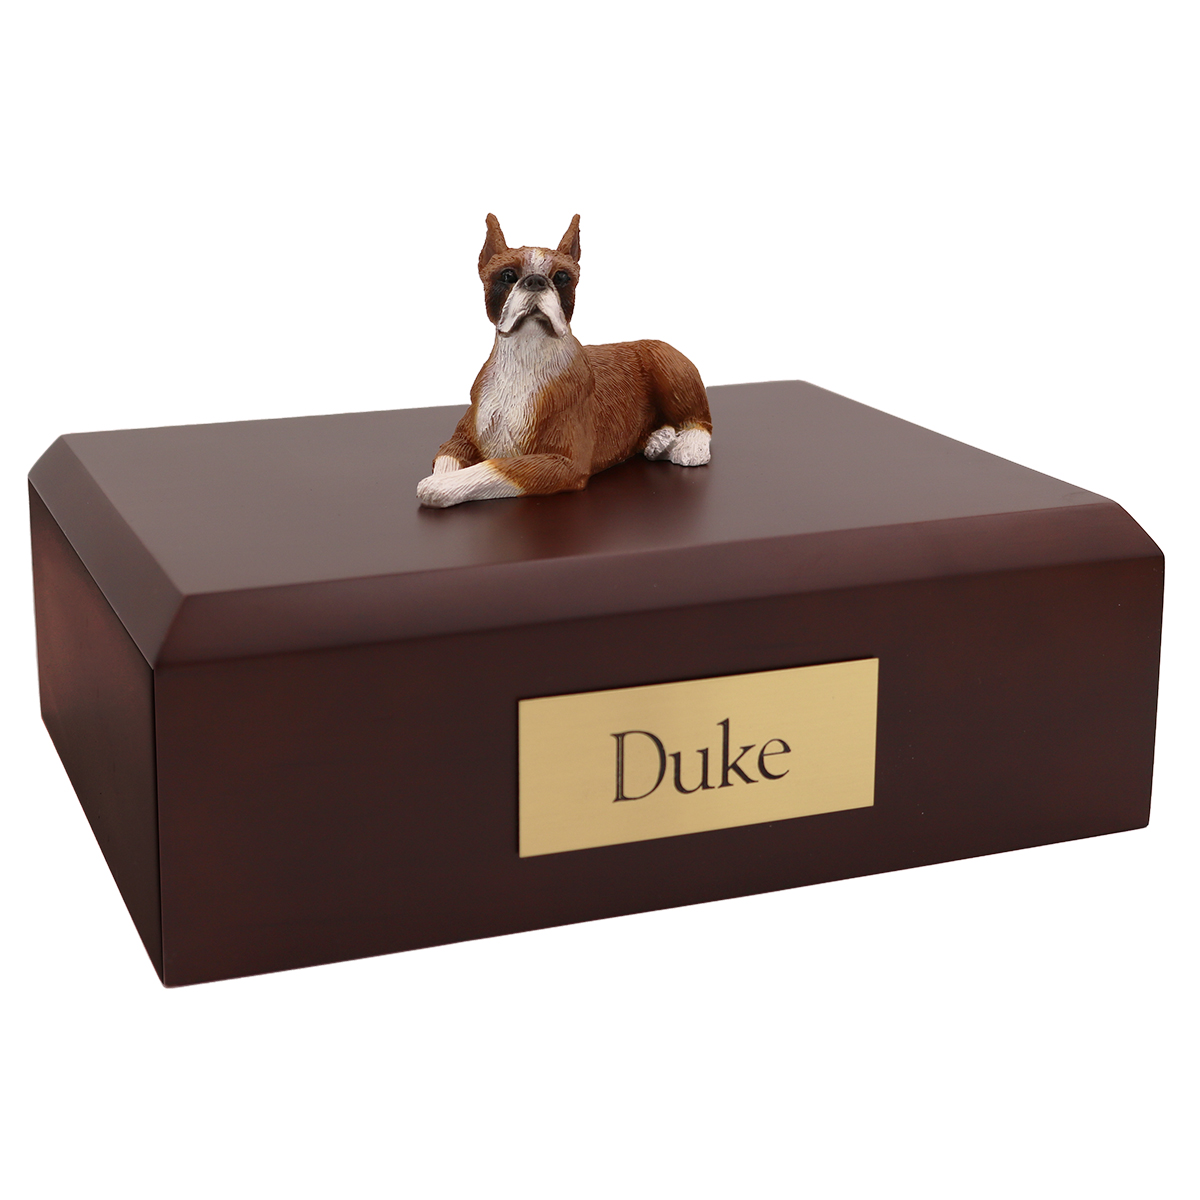 Dog, Boxer, Fawn - ears up - Figurine Urn